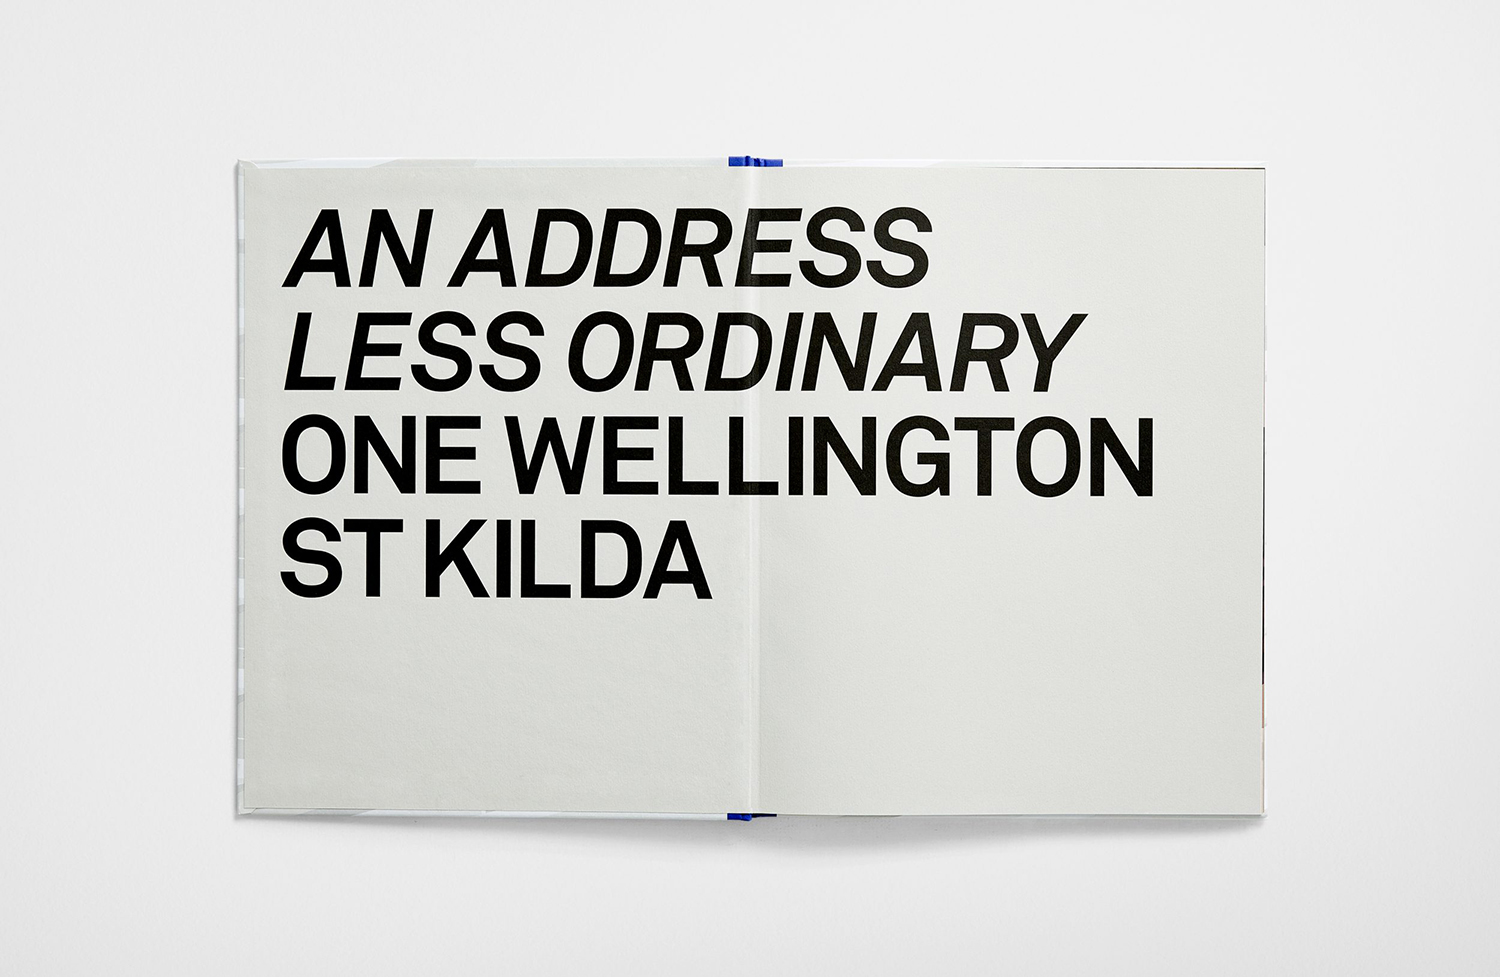 Brand identity and campaign designed by Studio Ongarato for property development One Wellington St Kilda